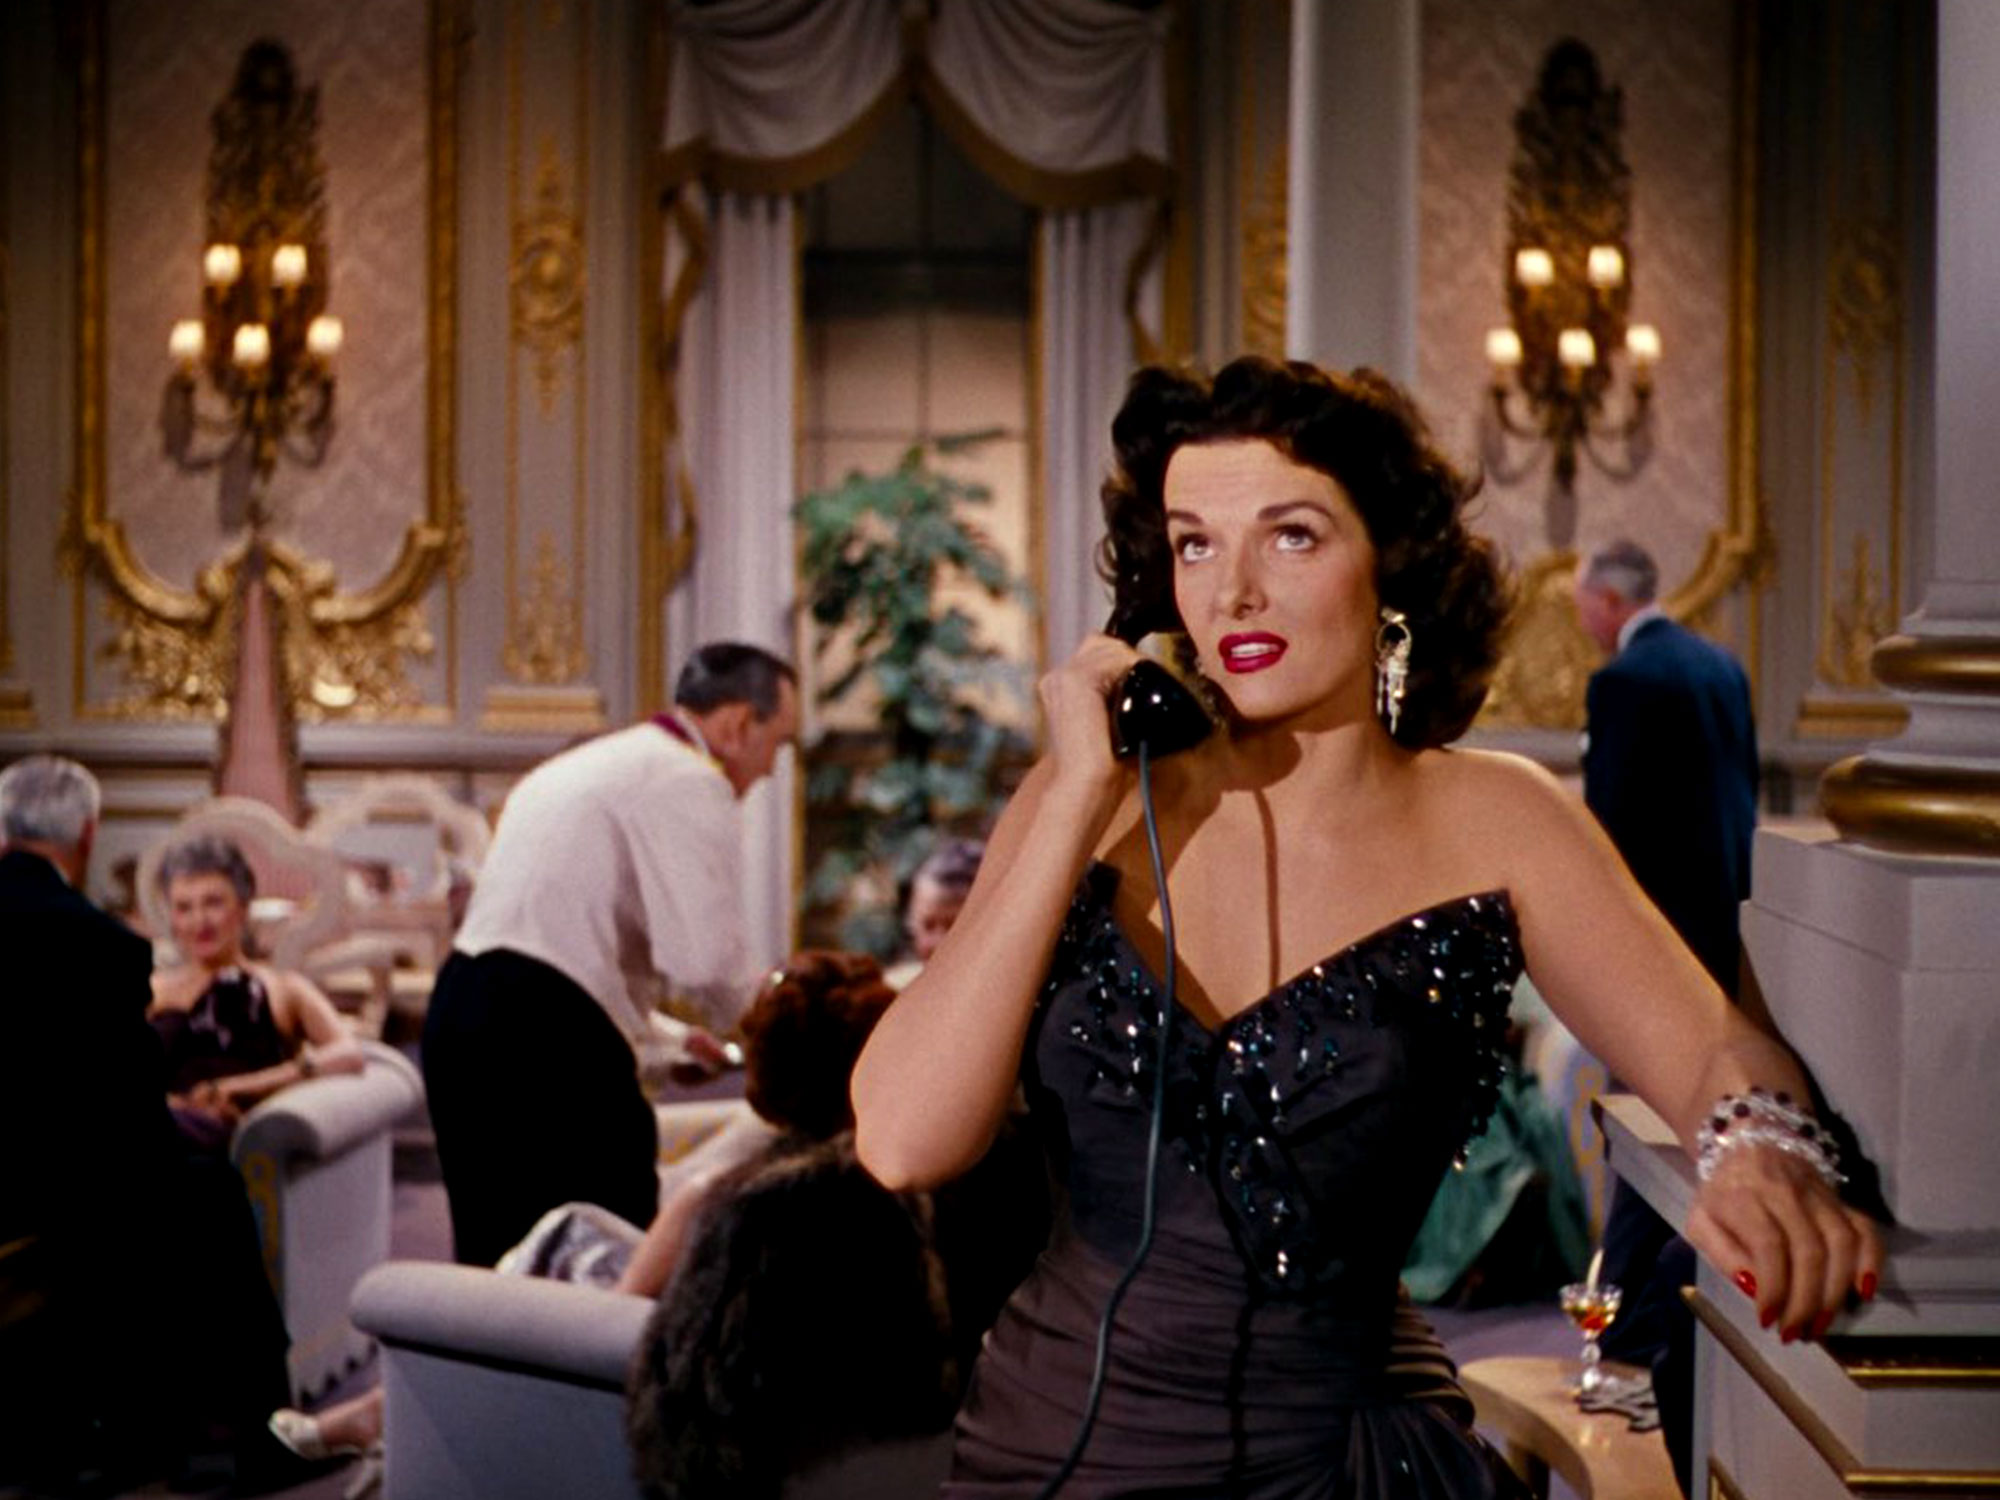 Why I love Jane Russell's performance in Gentlemen Prefer Blondes